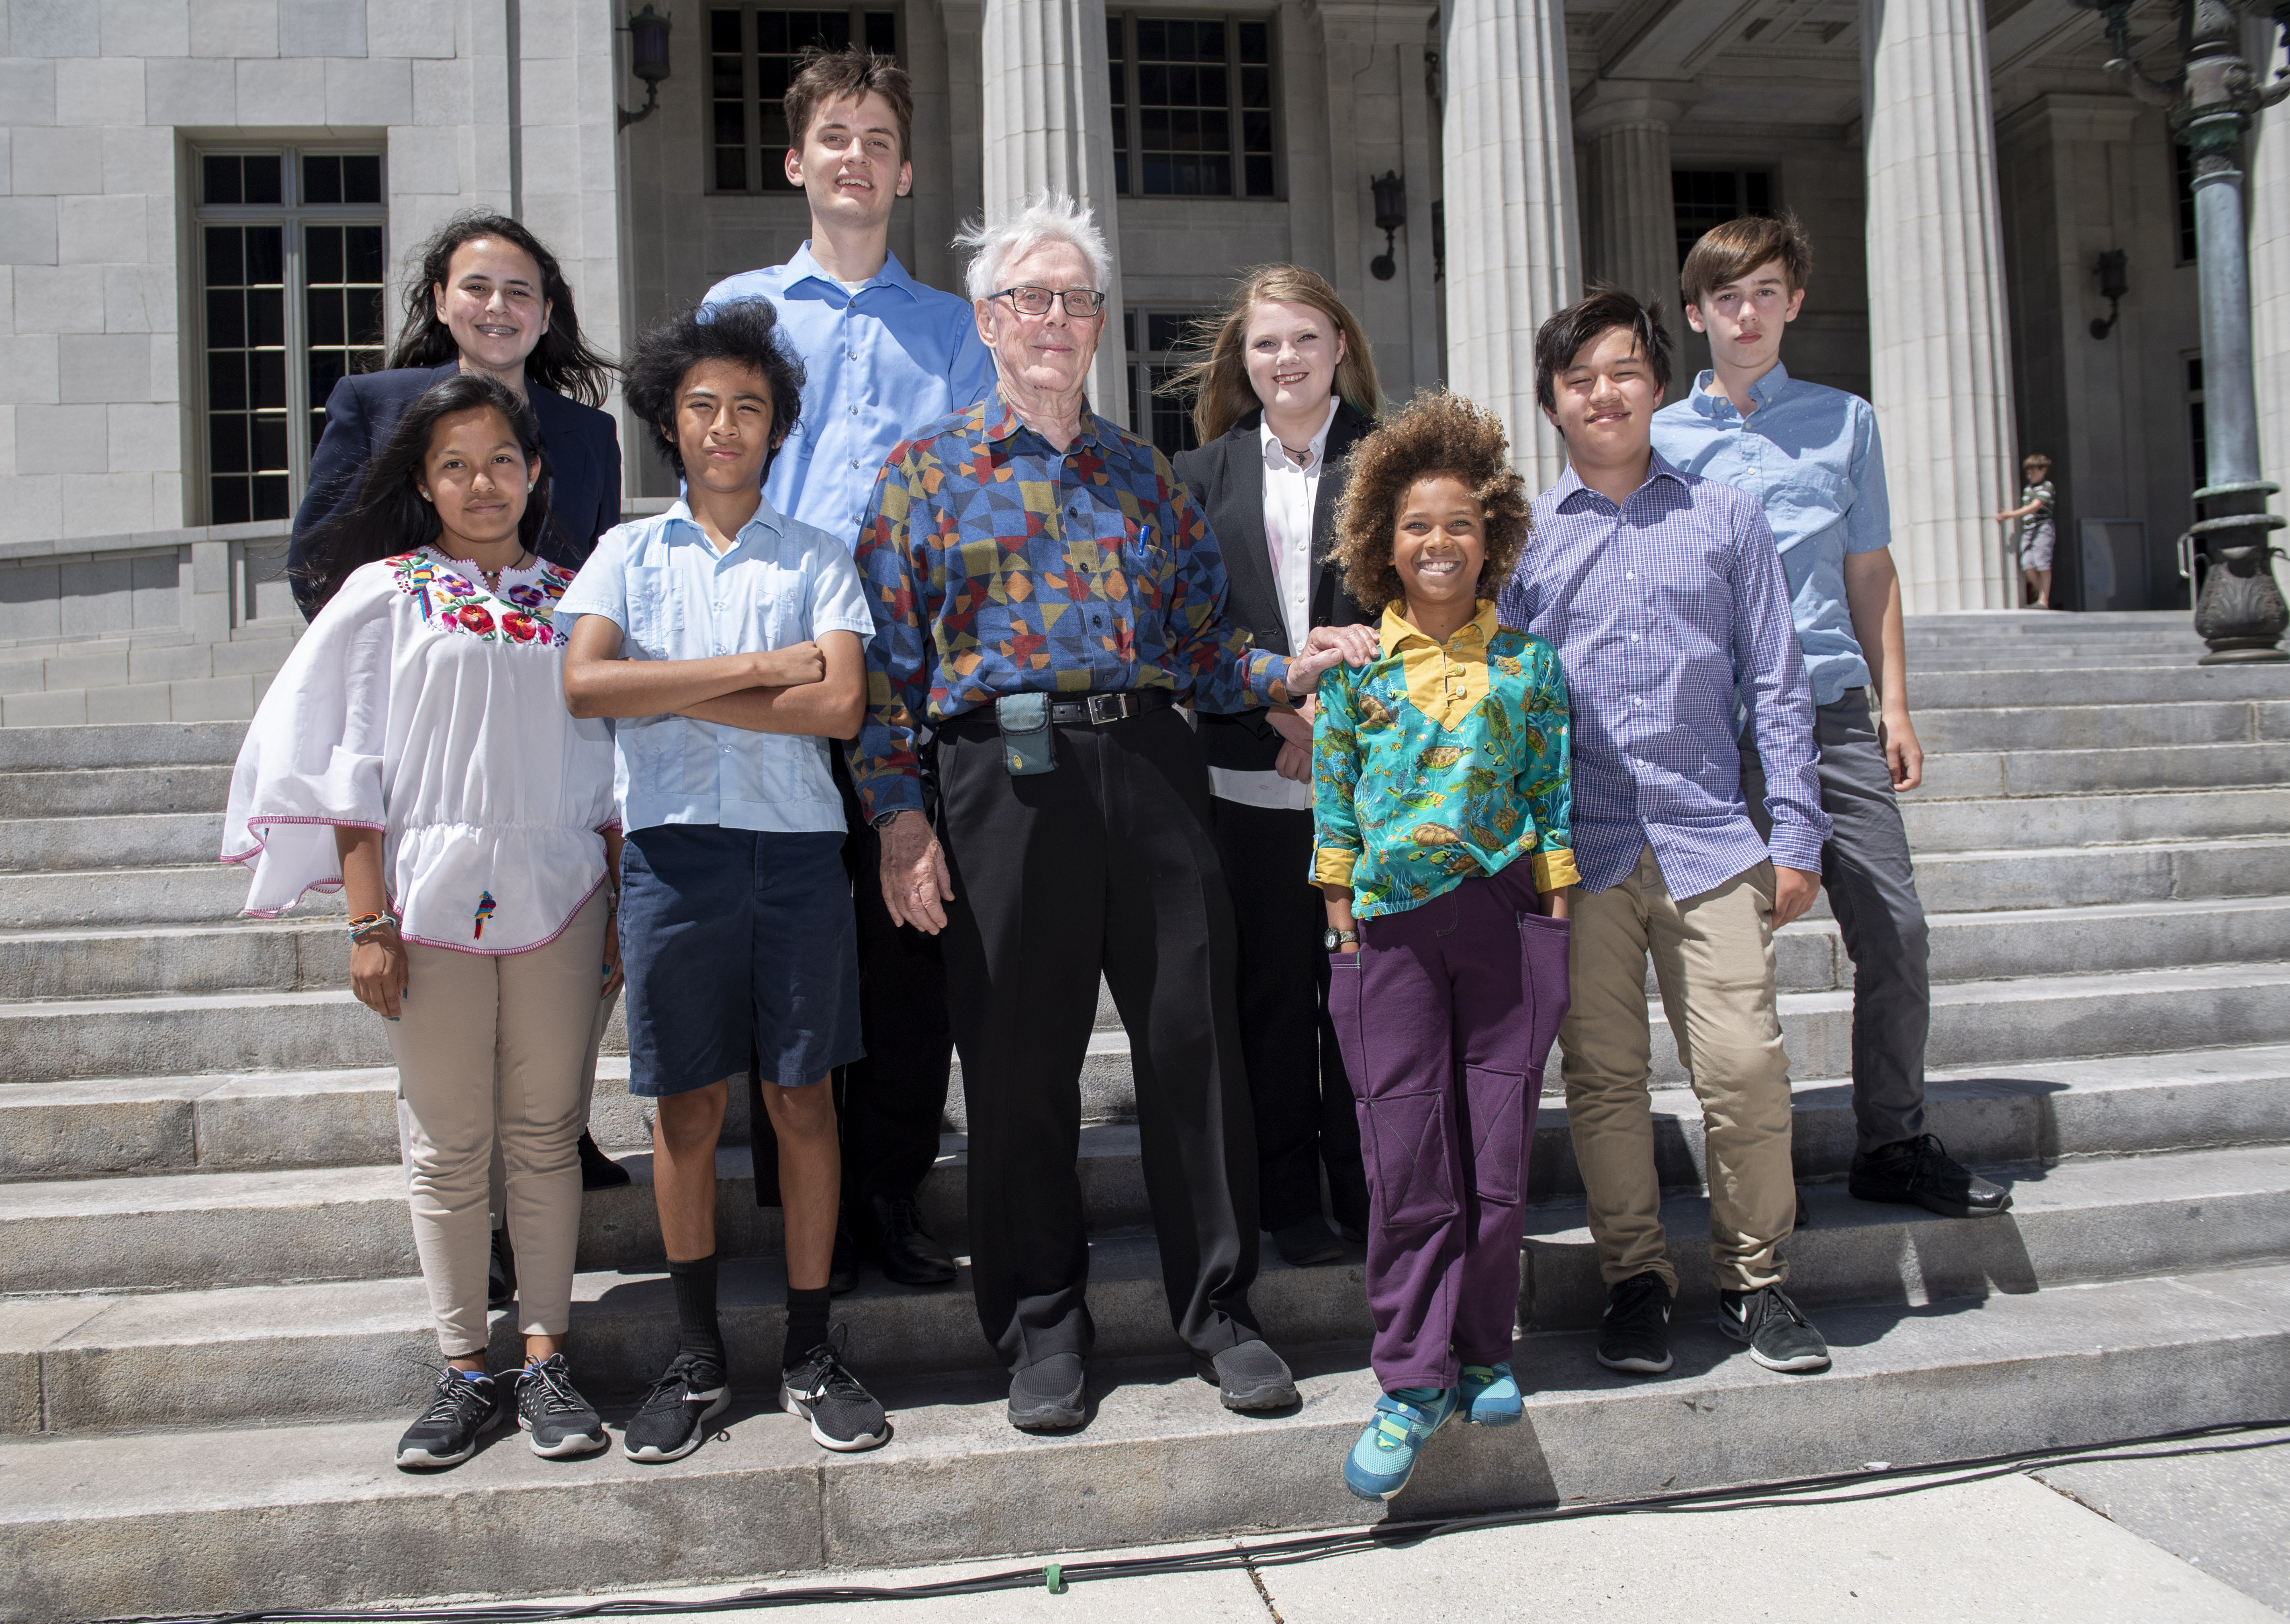 The kids with Dick Jacobs on courthouse steps in Miami in April 2018. Learn more at ourchildrenstrust.org/florida. [Courtesy of Robin Loznak, Our Children's Trust]